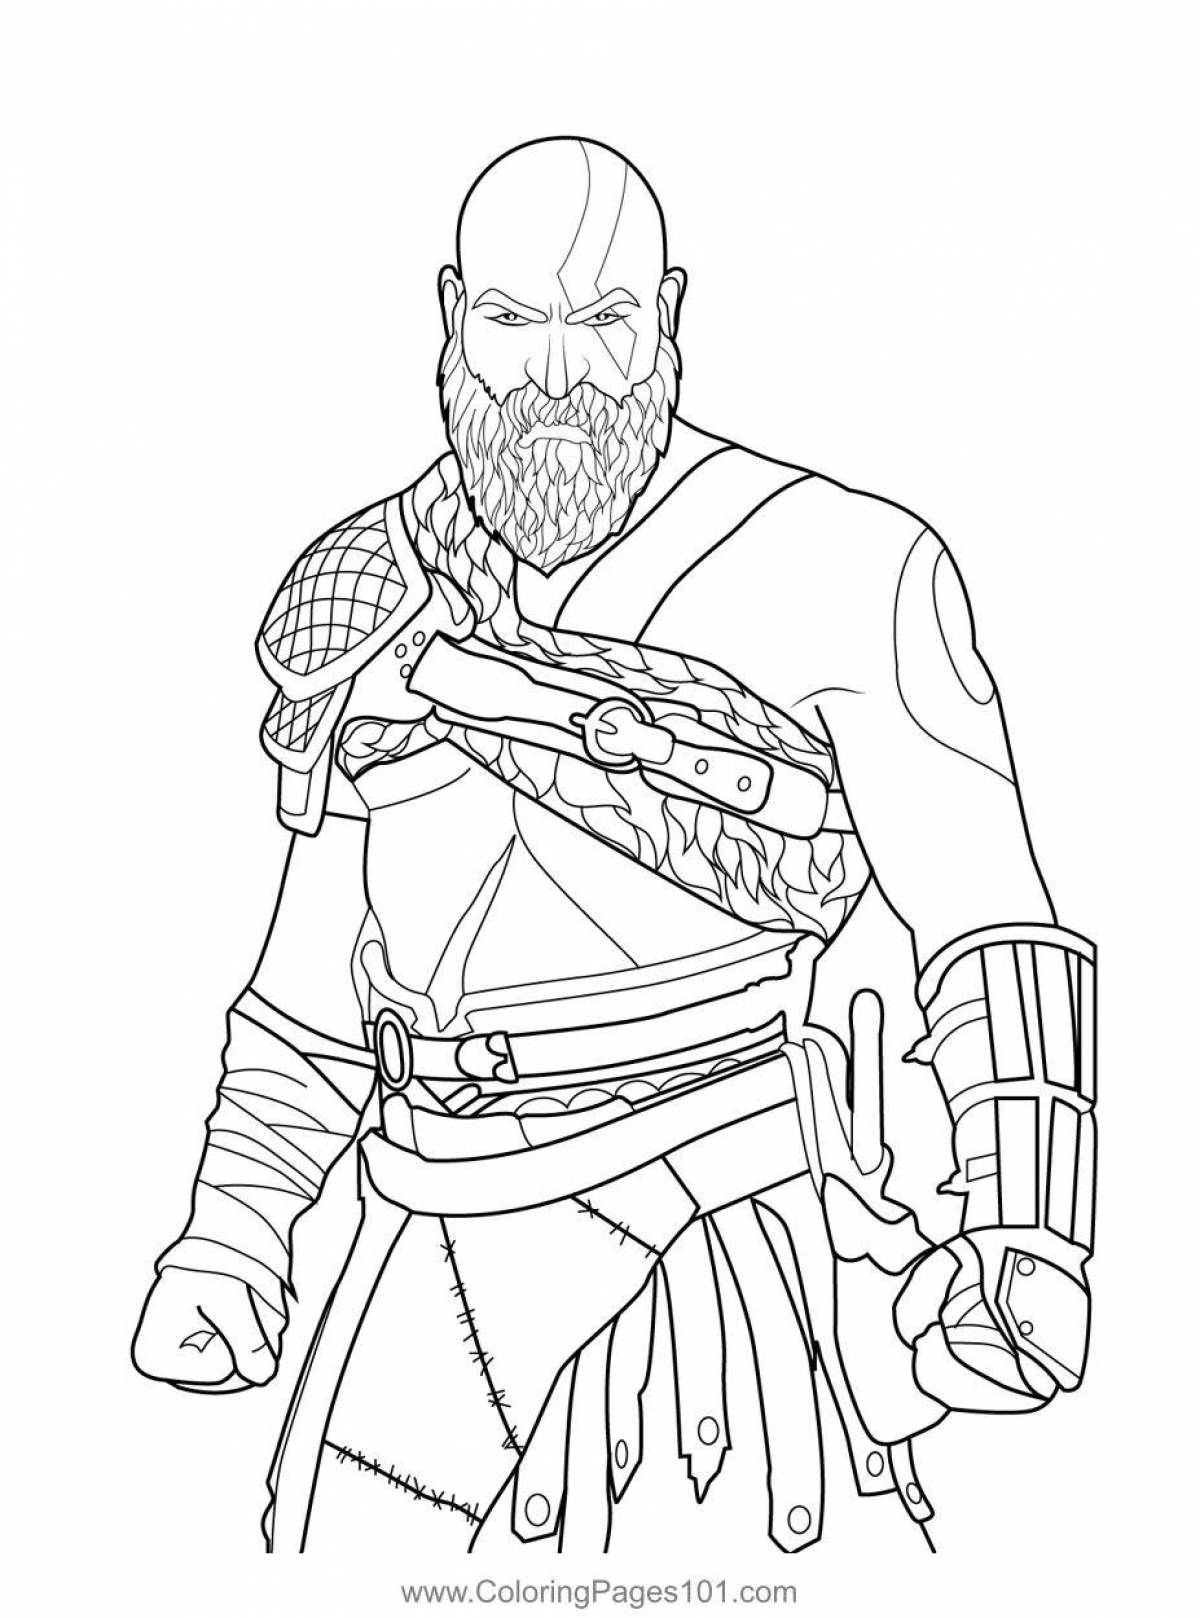 God of war majestic coloring book